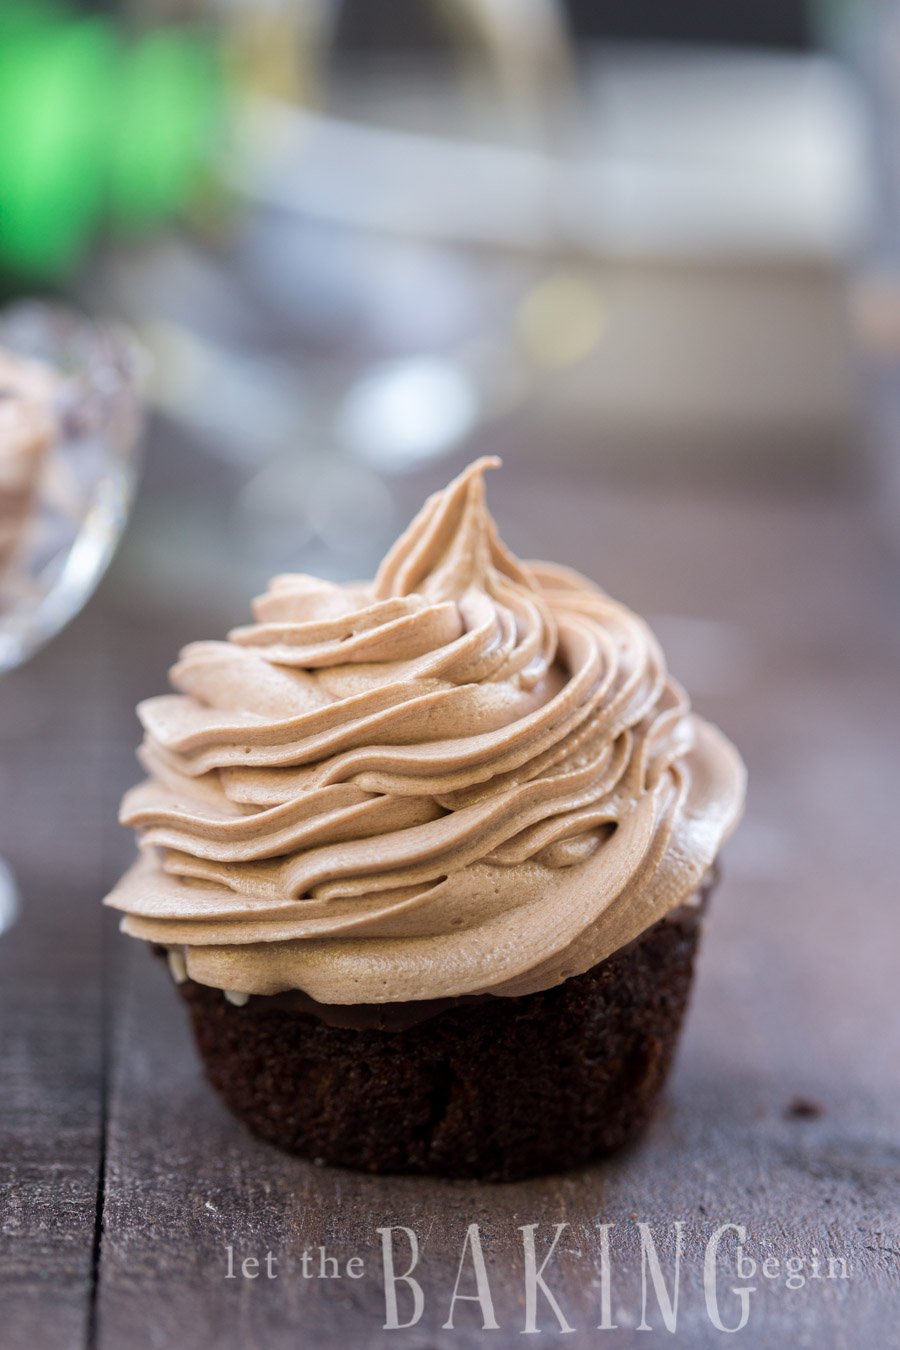 Buttercream frosting on a chocolate cupcake on a wooden table.